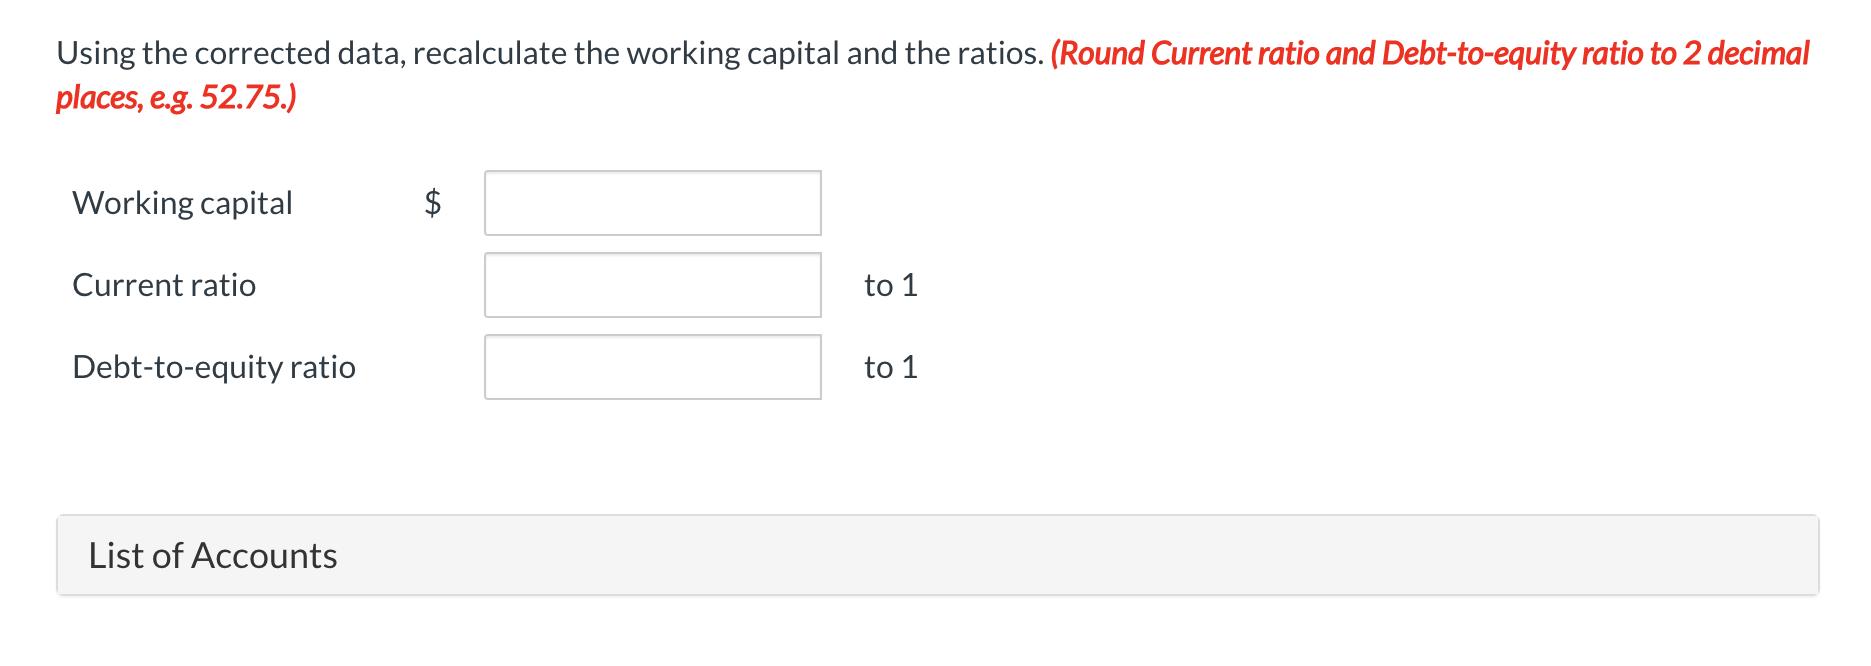 Using the corrected data, recalculate the working capital and the ratios. (Round Current ratio and Debt-to-equity ratio to 2